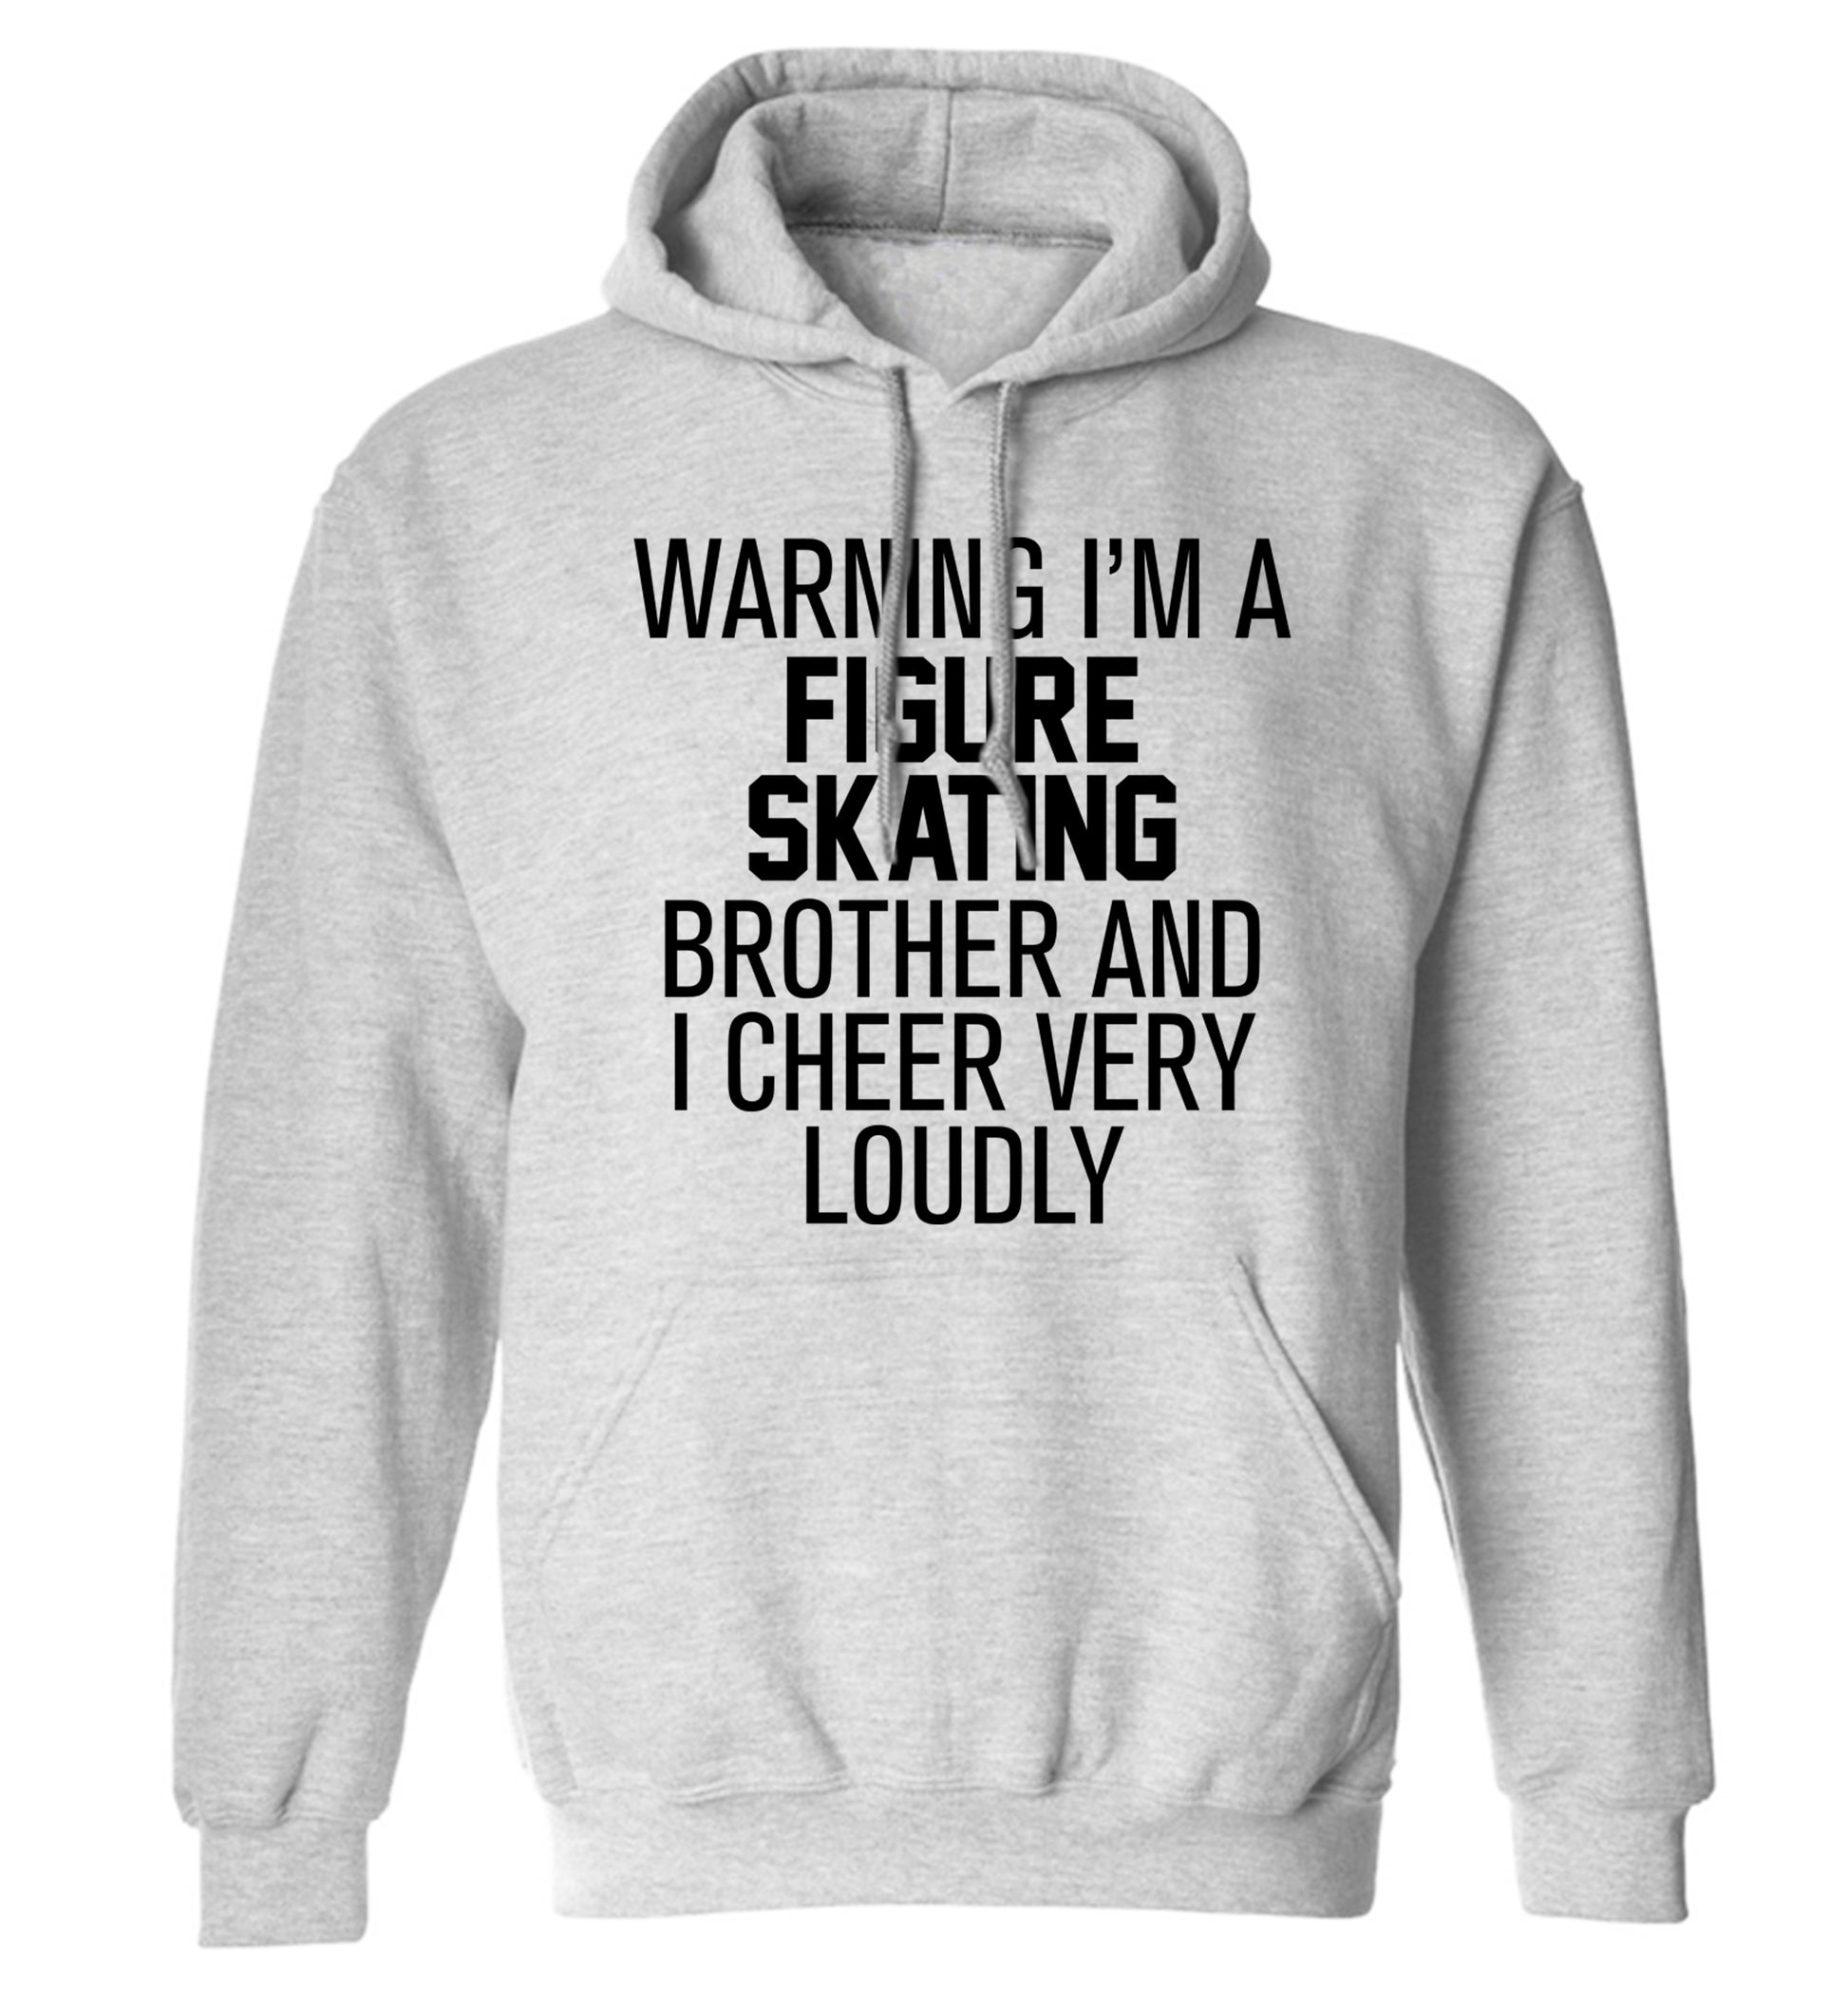 Warning I'm a figure skating brother and I cheer very loudly adults unisexgrey hoodie 2XL